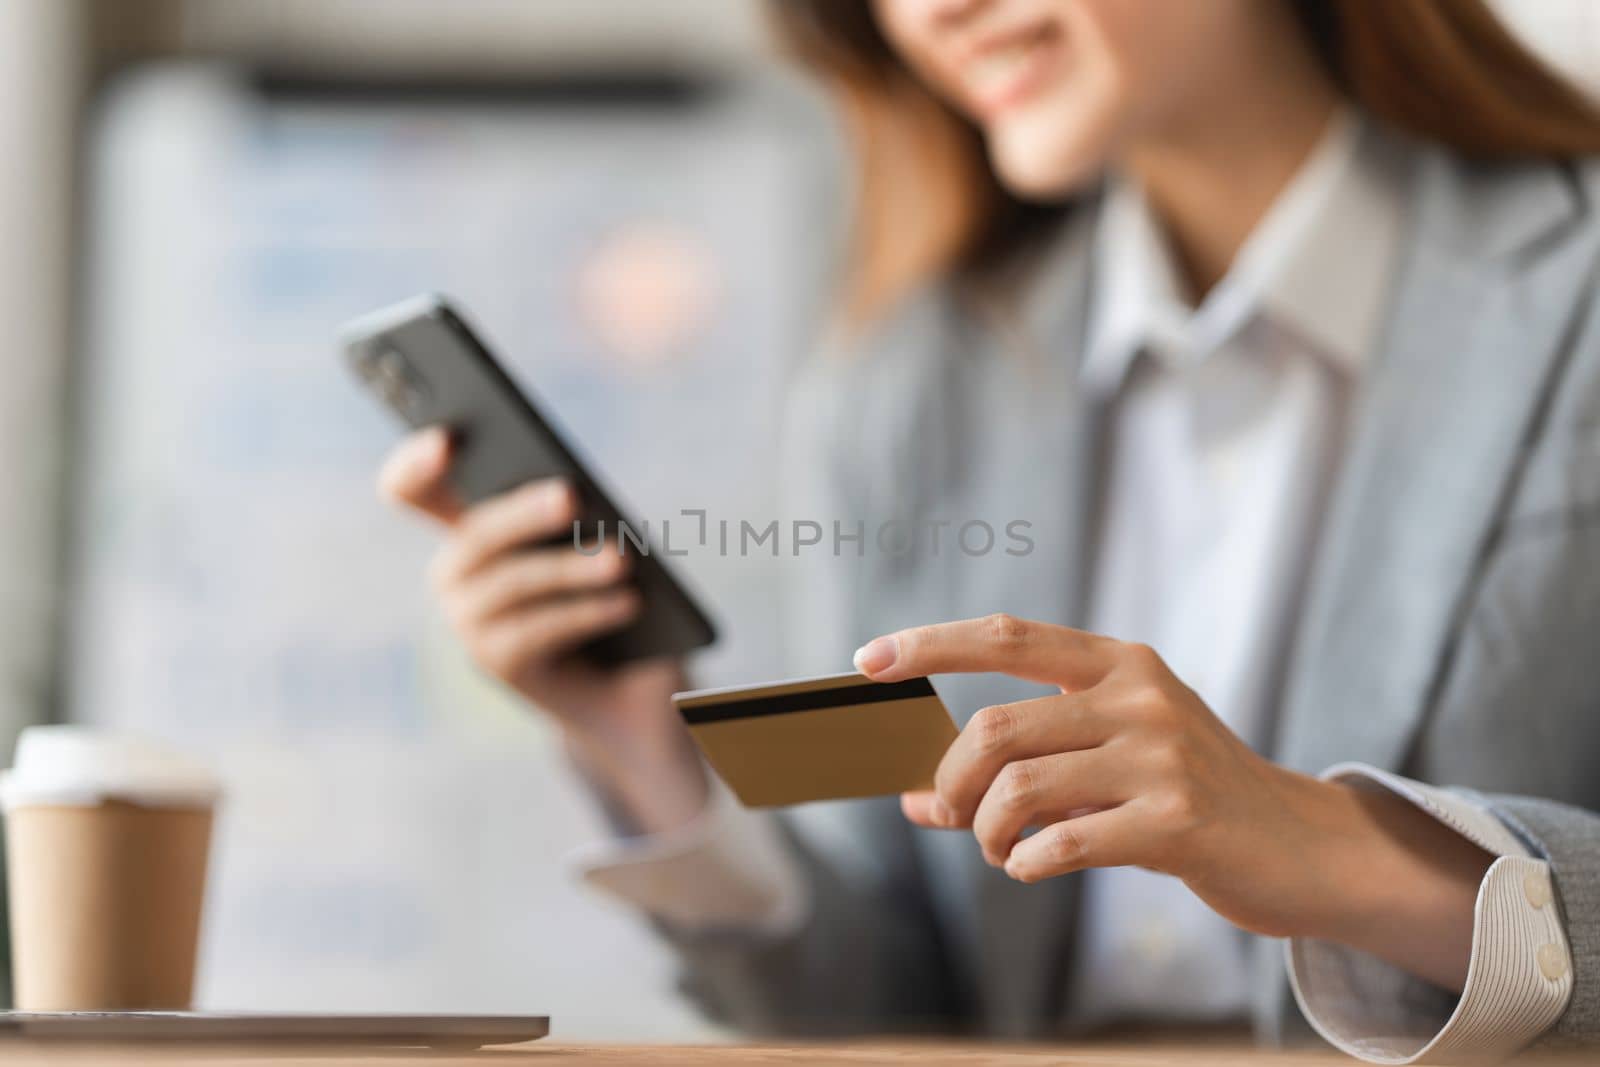 Young person using credit card and mobile phone. Online shopping, e-commerce concept.